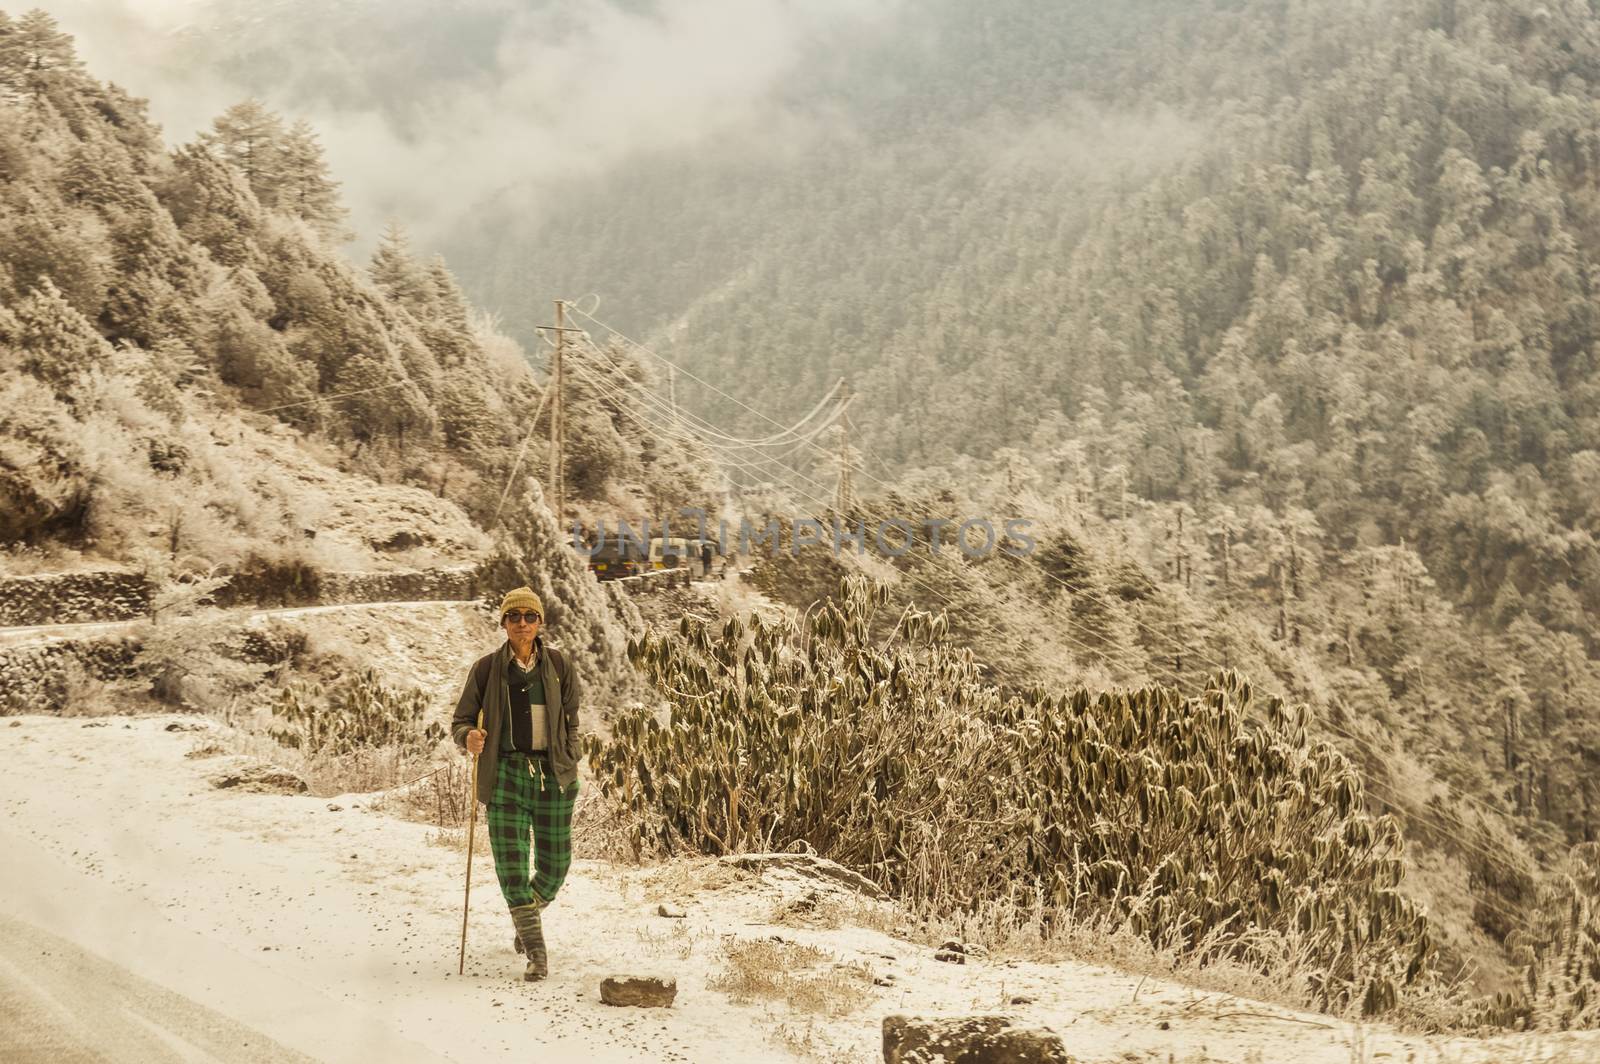 A Mature old (a man of Nepalese ethnicity) solitary hiker on a hiking trail walking alone in a beautiful winter environment of North east Himalayan Mountain range. Nepal, South Asia. by sudiptabhowmick